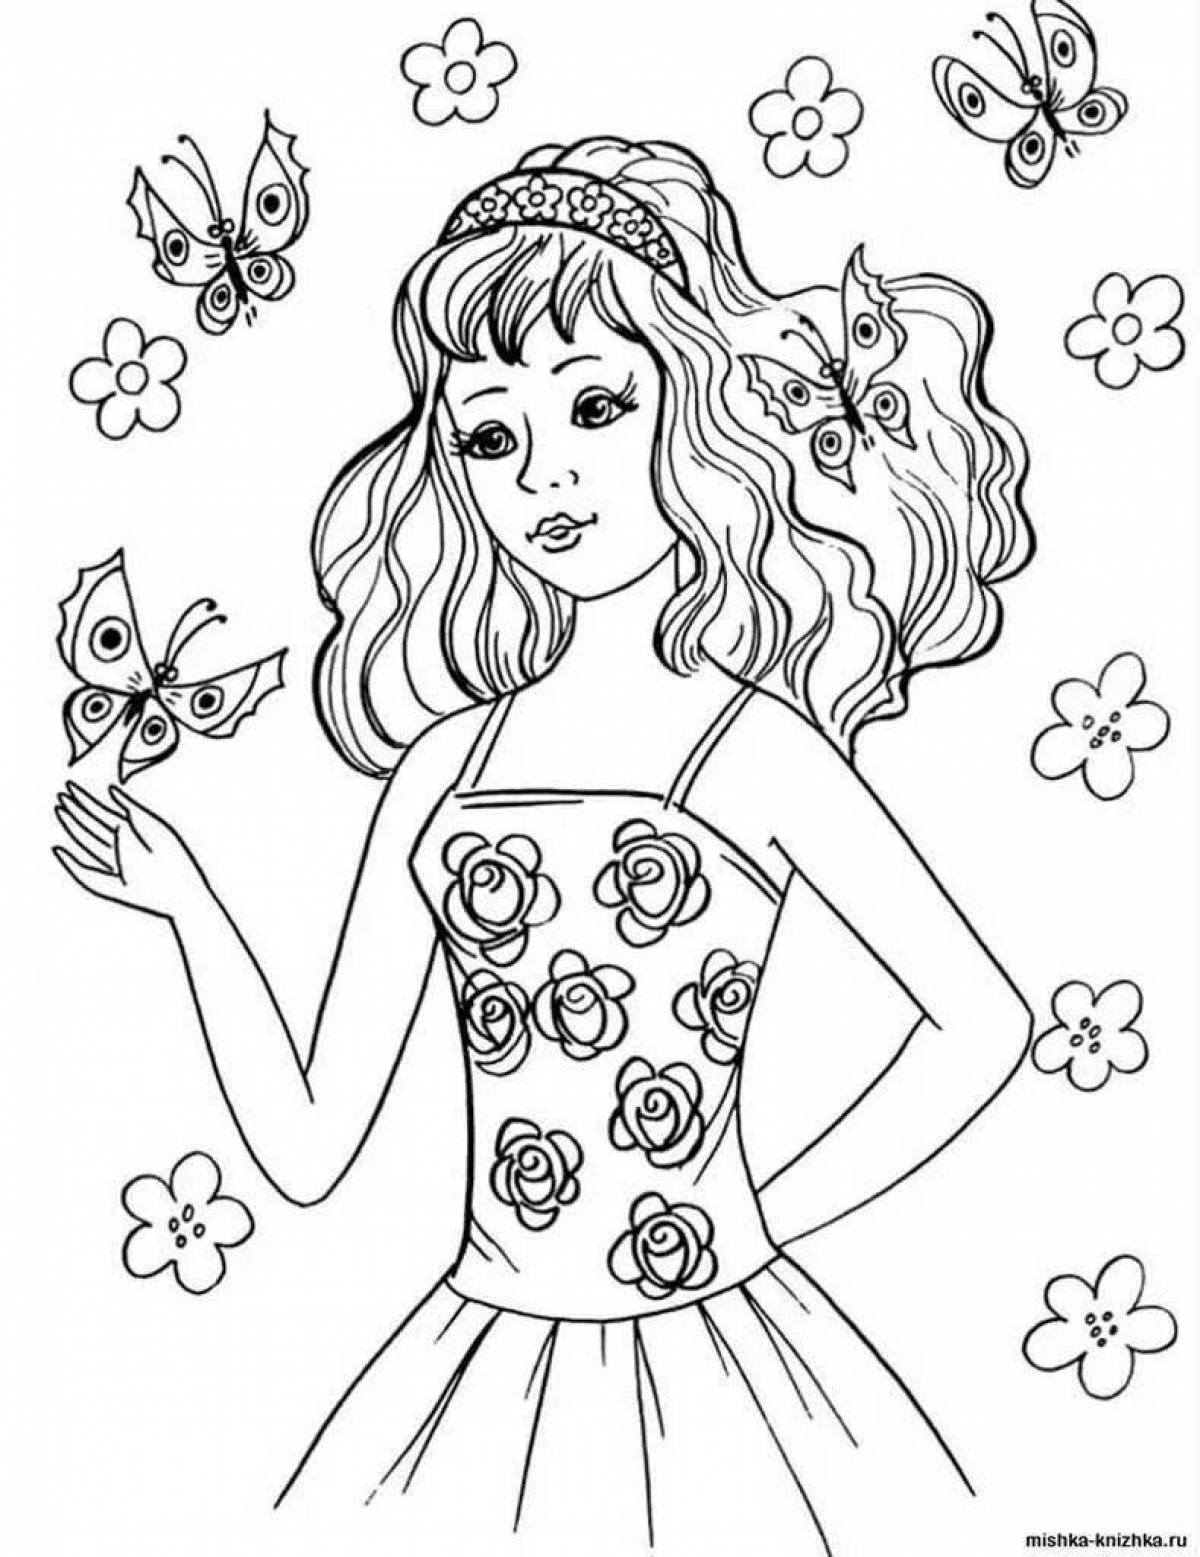 Magic coloring book for 11 year old girls